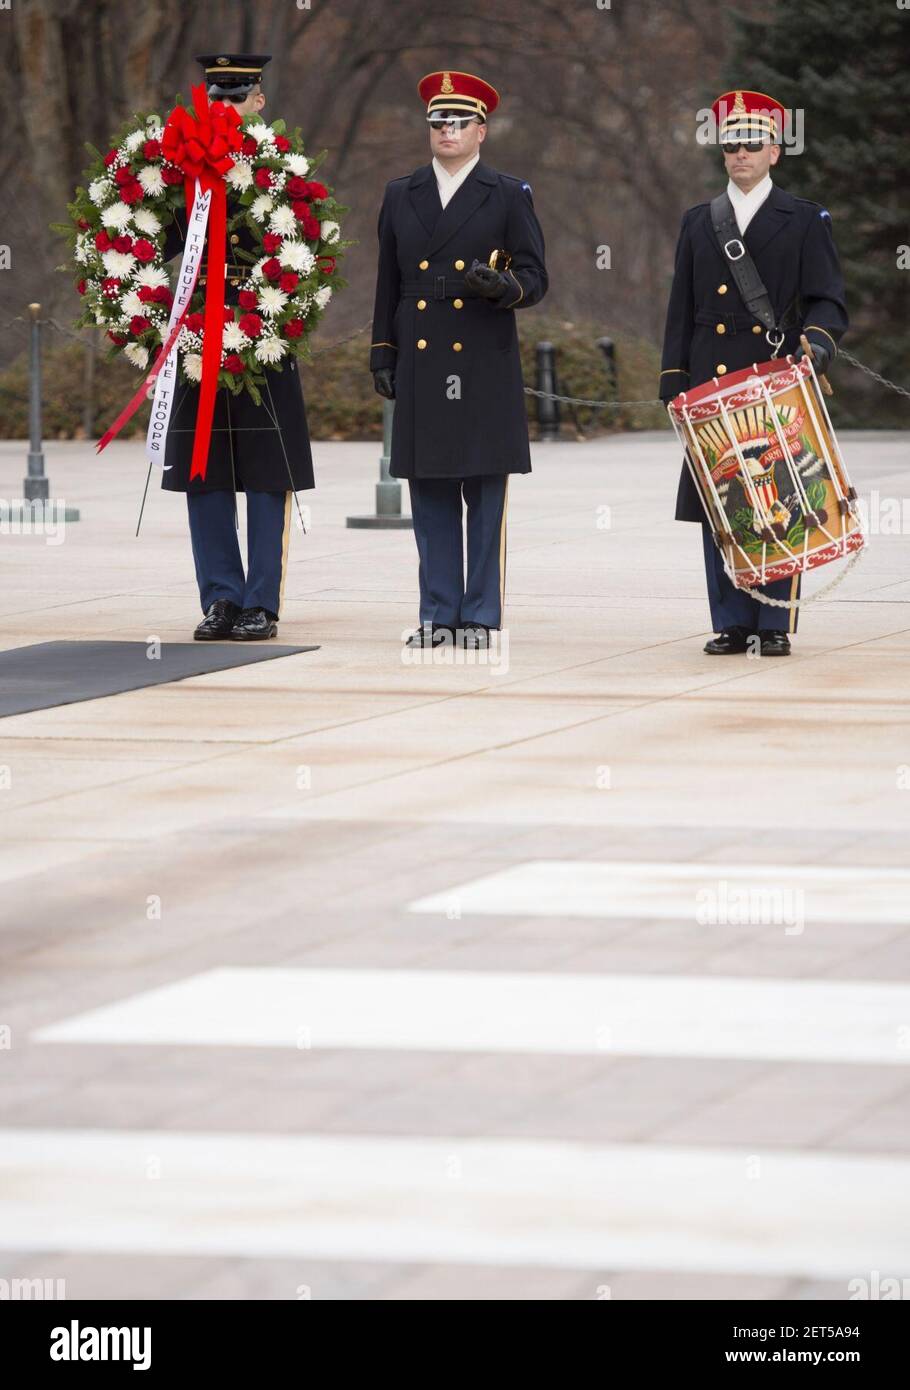 Paul “Triple H” Levesque and WWE Chief Brand Officer Stephanie McMahon place a wreath at the Tomb of the Unknown Soldier in Arlington National Cemetery (31623475505). Stock Photo